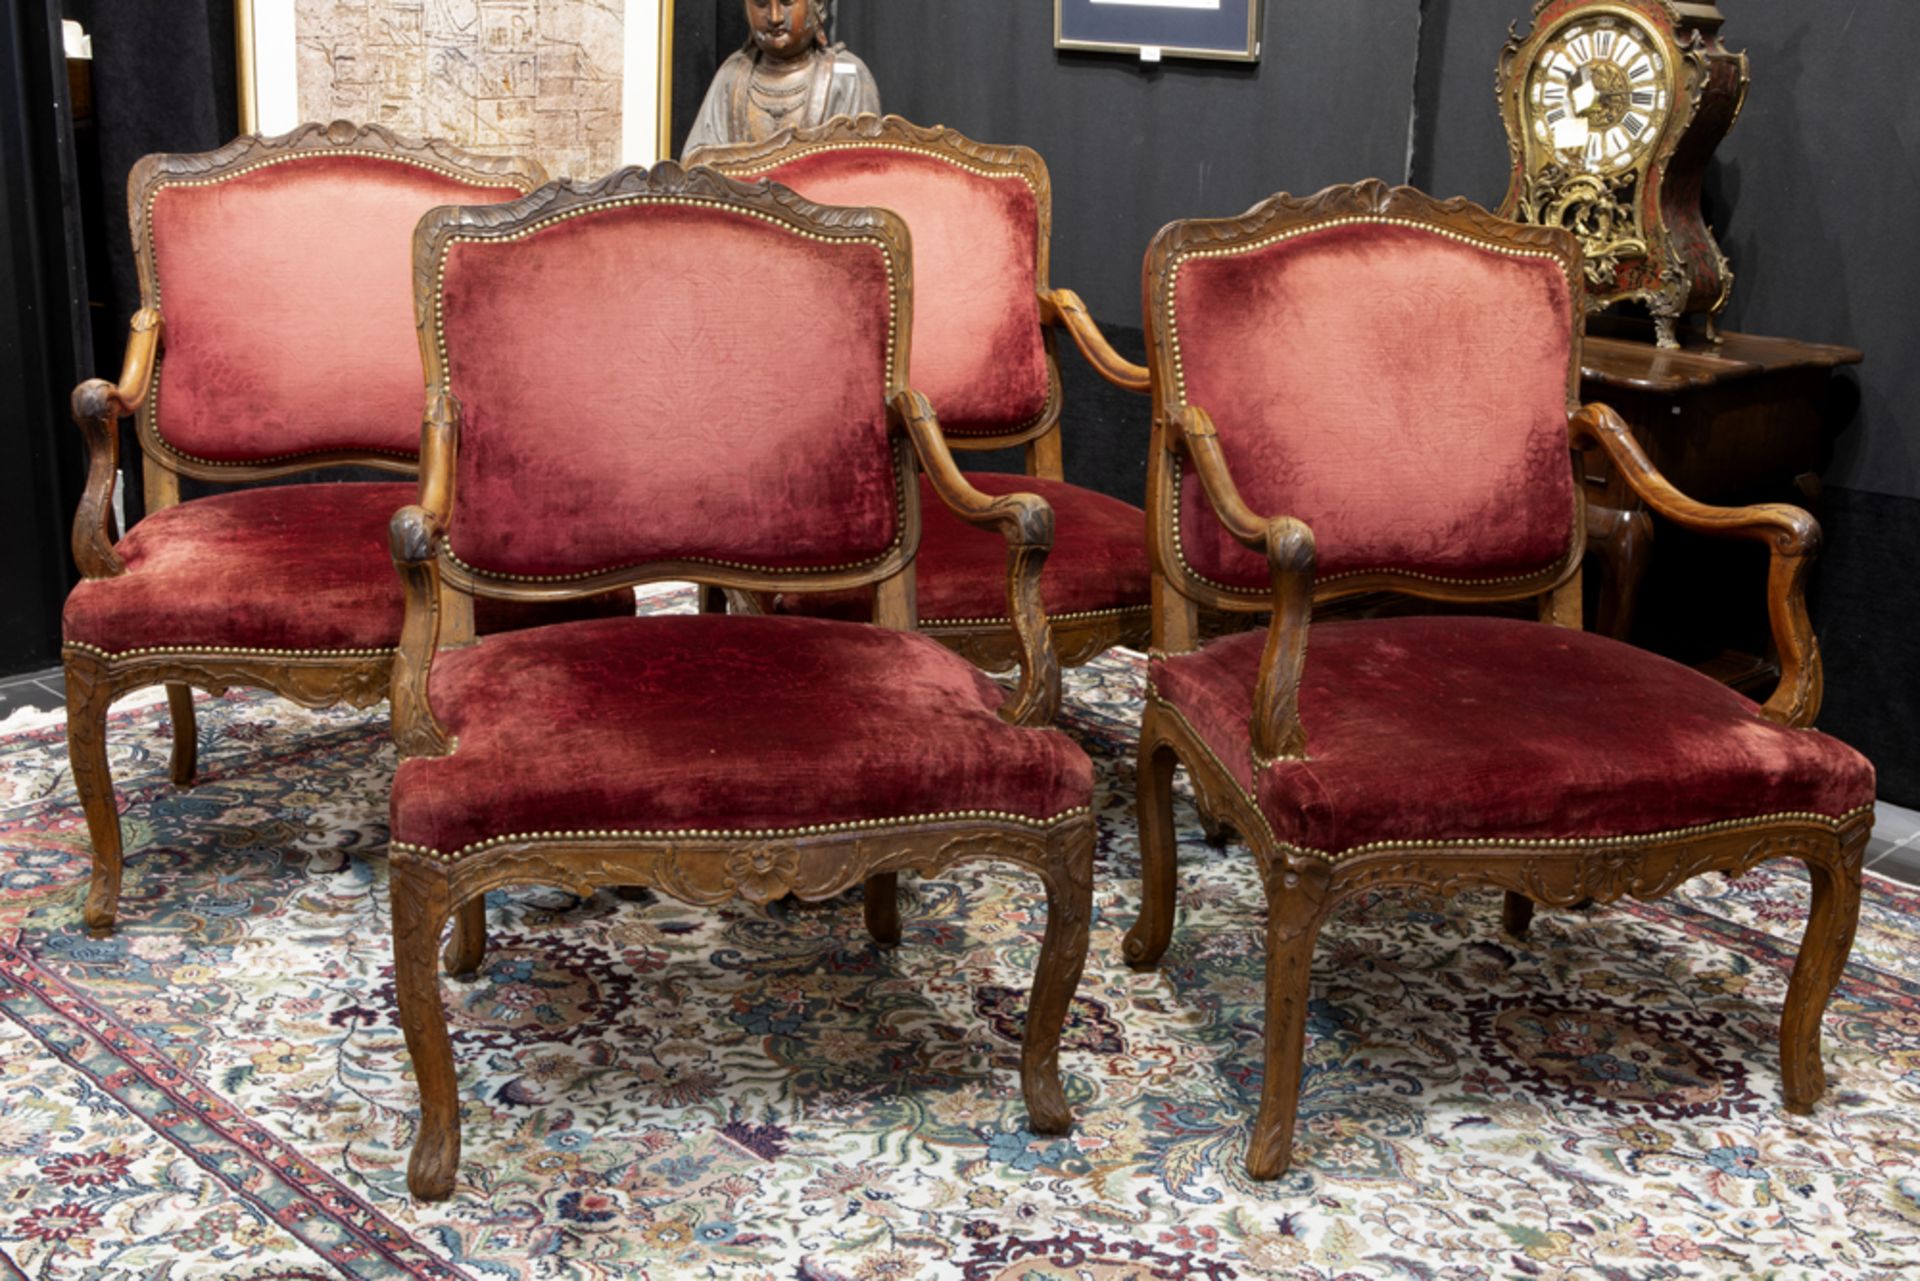 set of four 18th Cent. armchairs in walnut with finely carved Régence style ornamentation||Set van